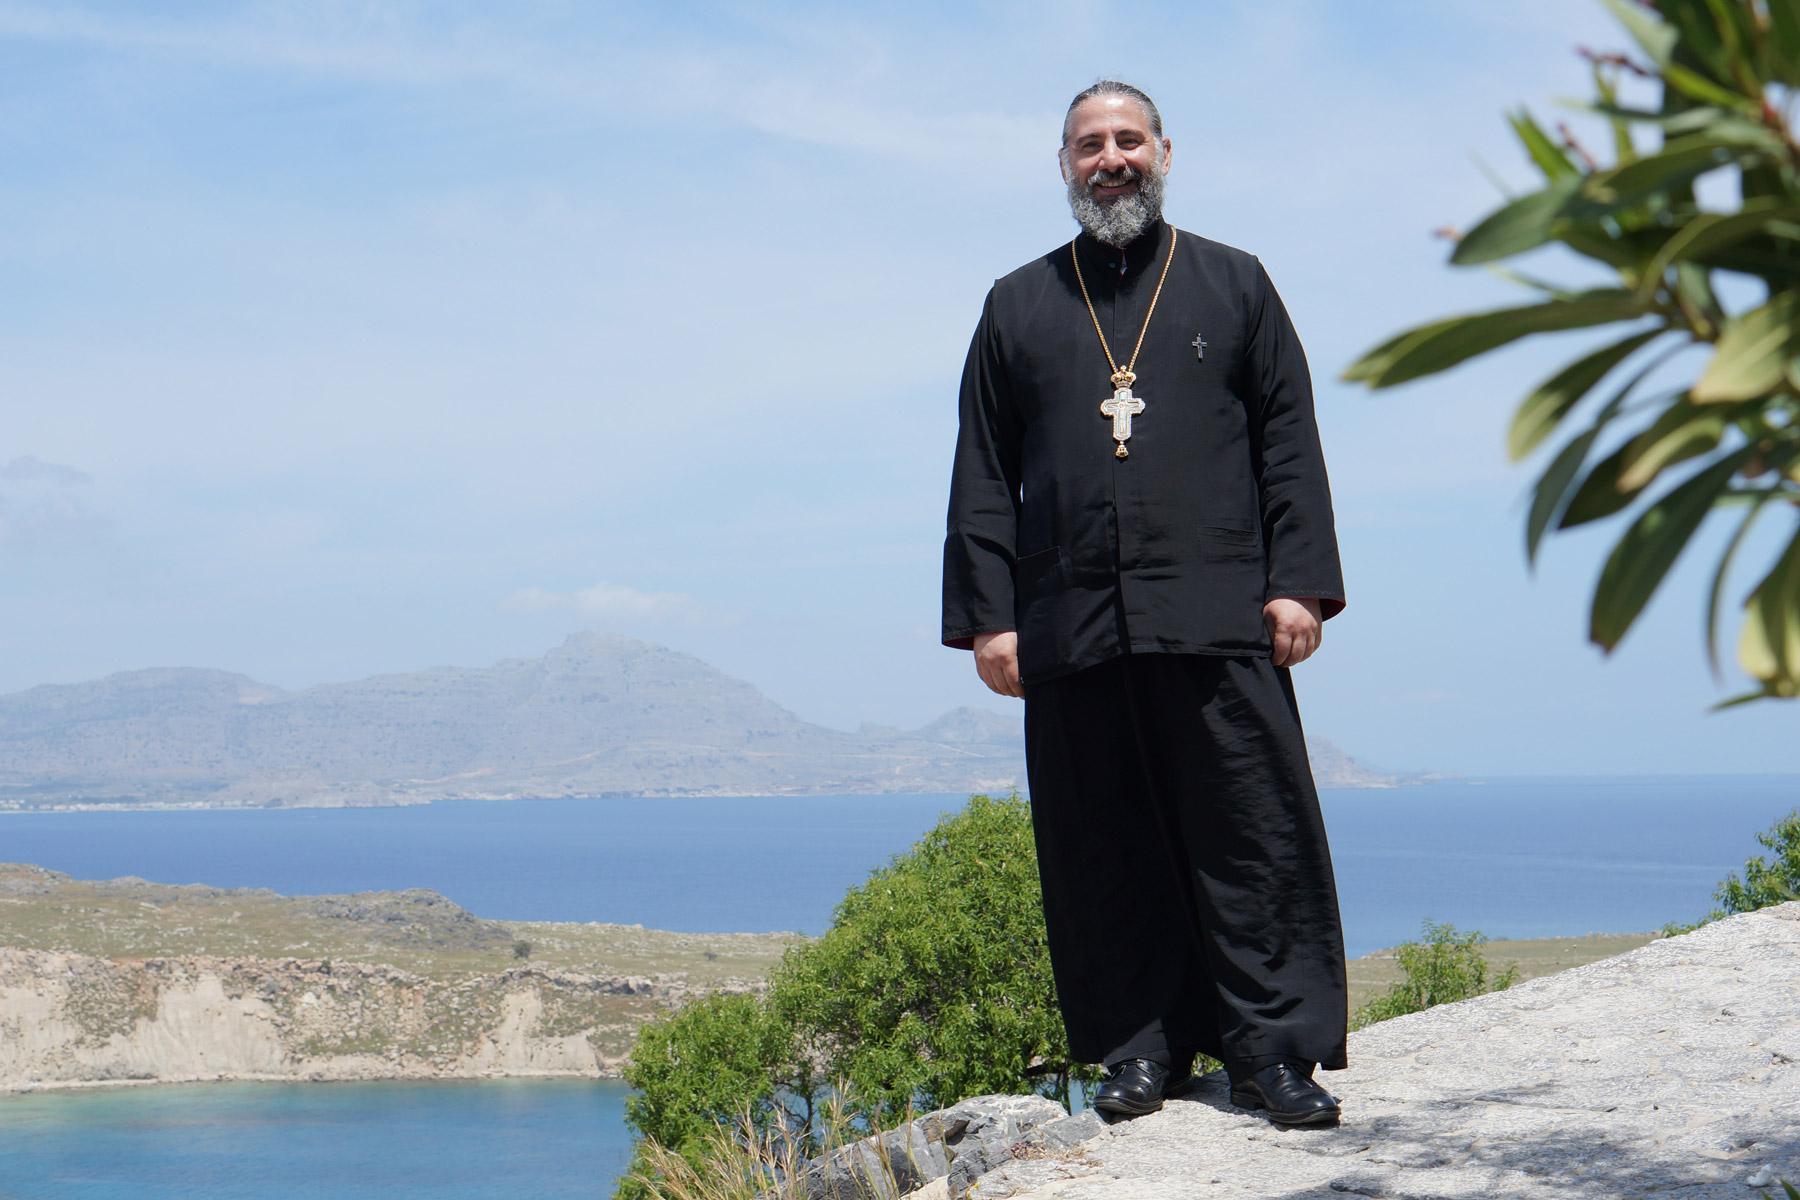 Archimandrite Alexi Chehadeh was a member of LWFâs Joint Lutheran-Orthodox Commission since 2015. Photo: Kenneth Appold 